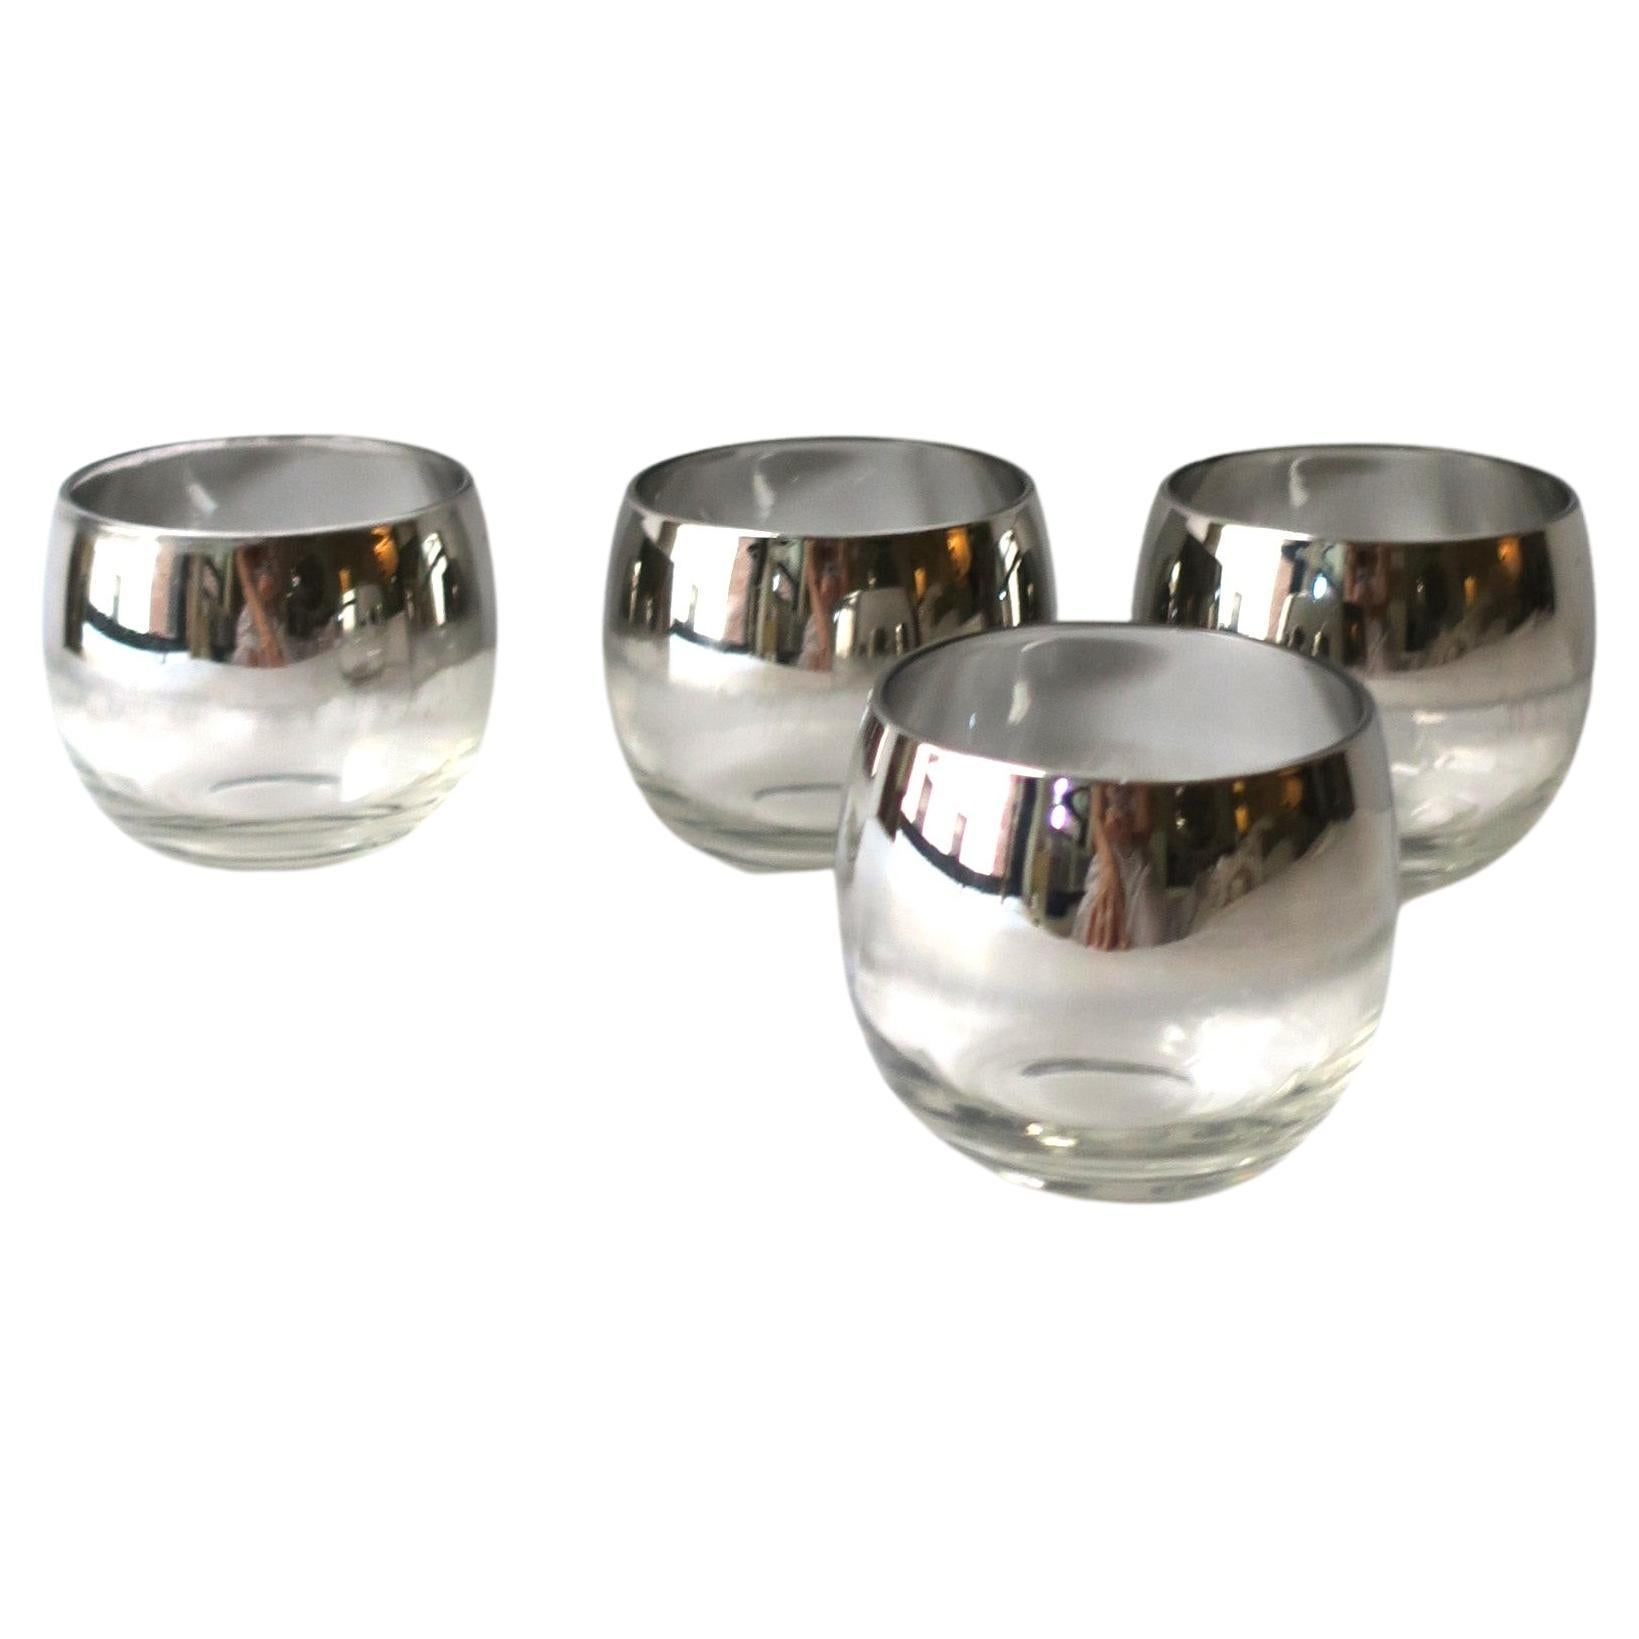 Midcentury Modern Cocktail Glasses Lowball Roly Poly, Set of 4